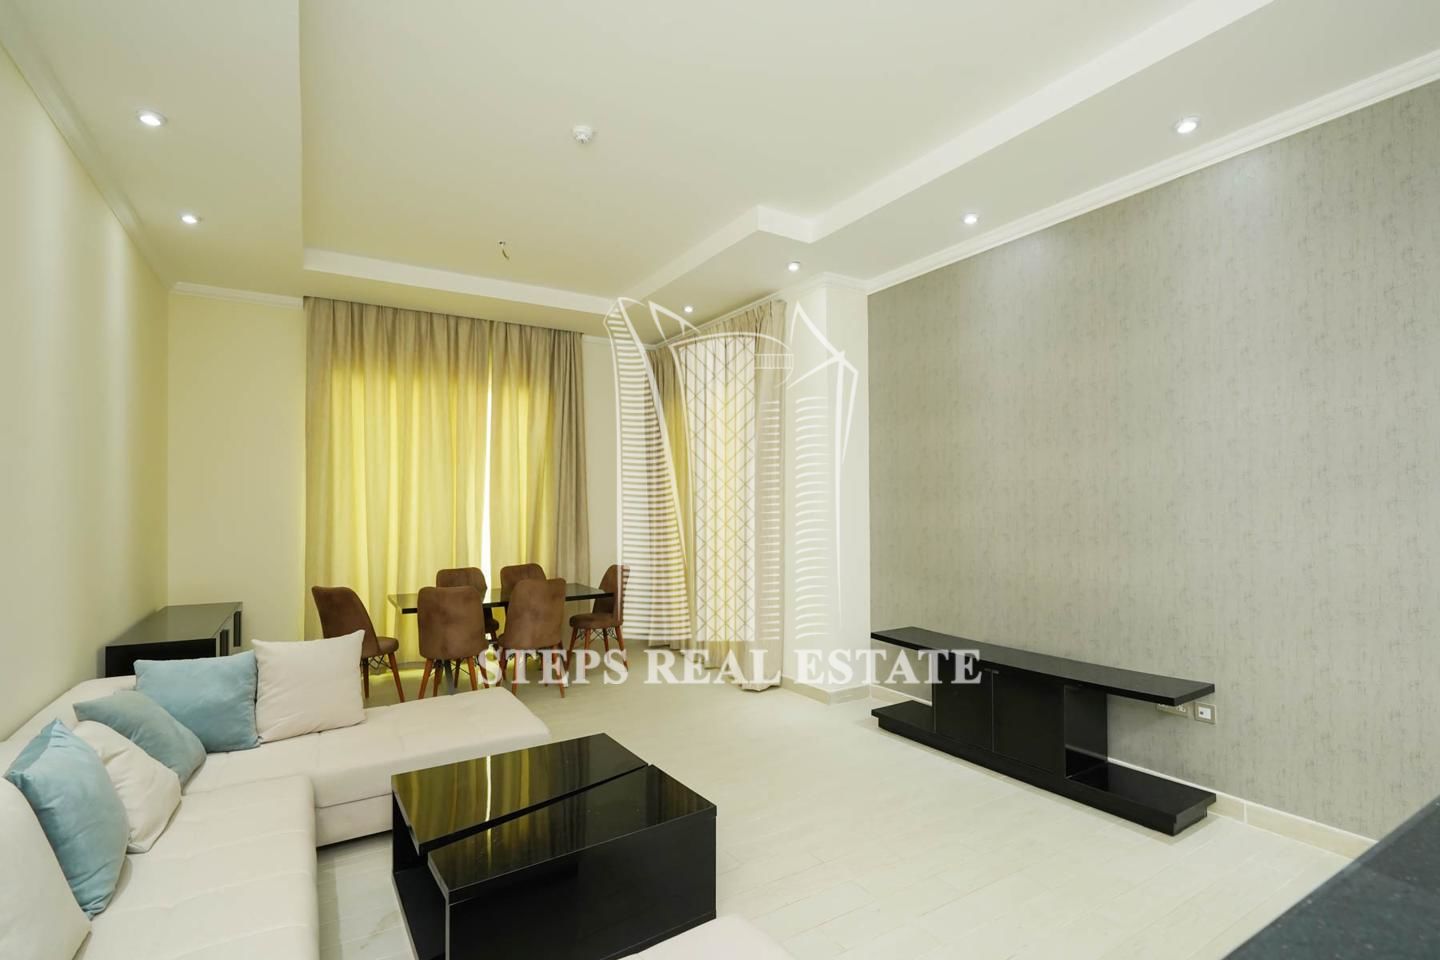 1 Bedroom Apartment with High ROI